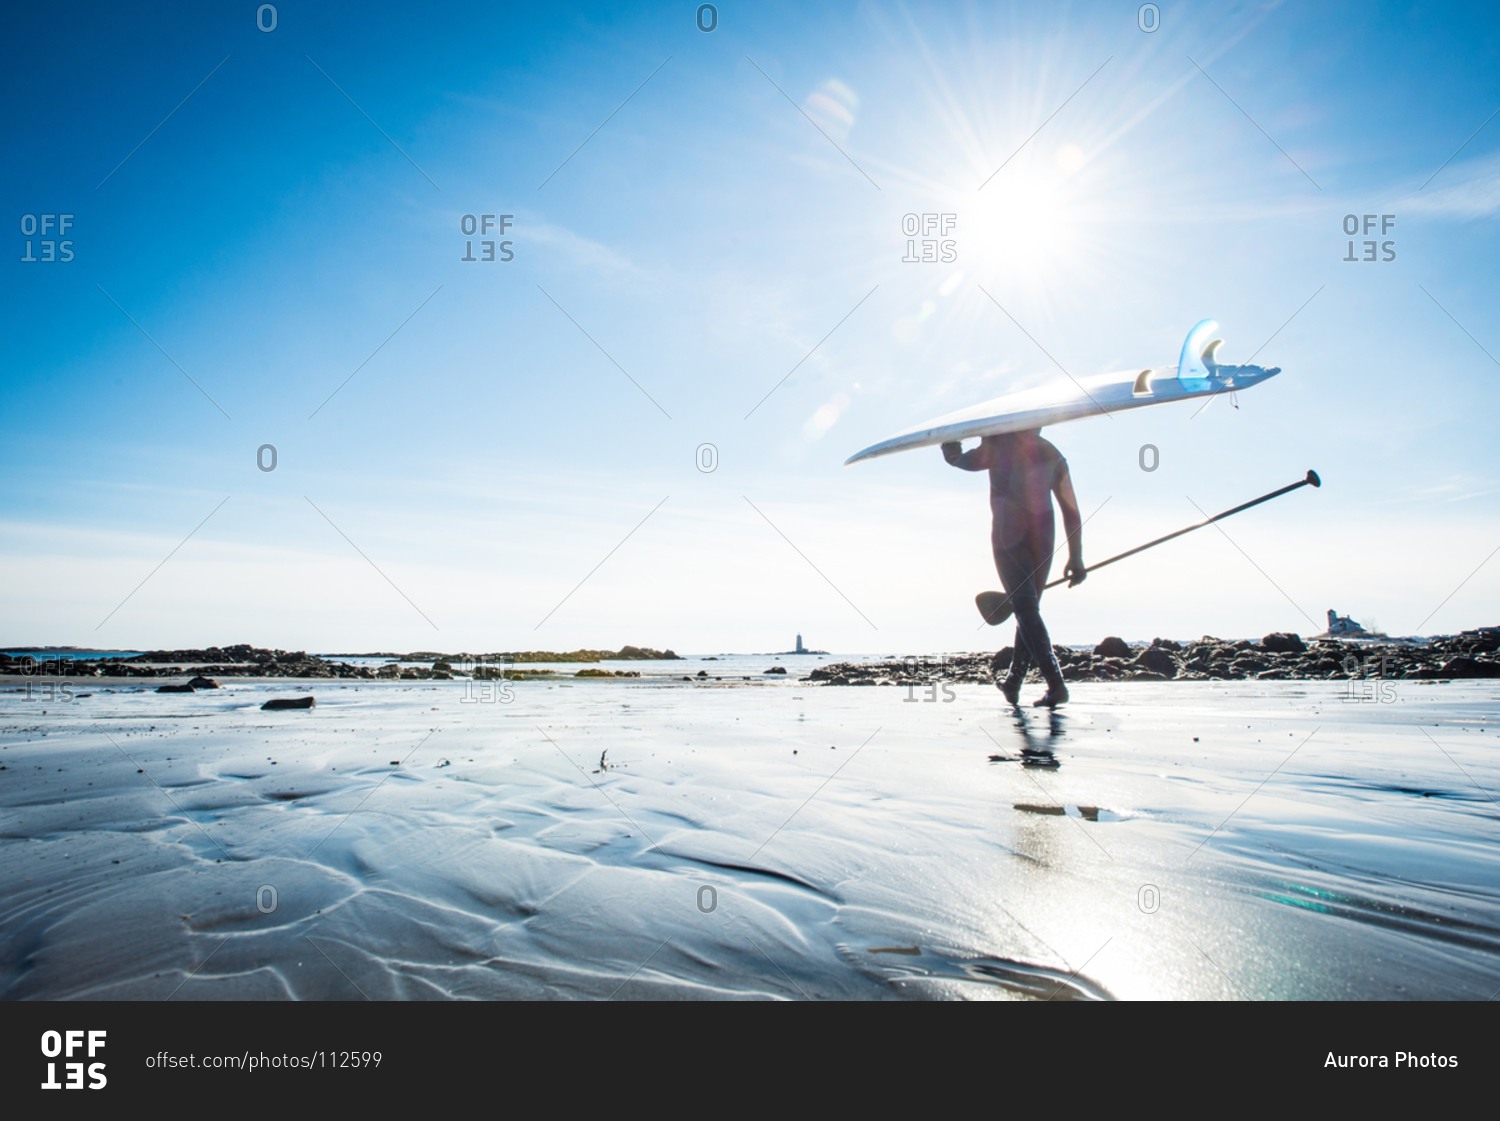 Wide angle view of a man in winter going stand up paddle surfing in Kittery, Maine